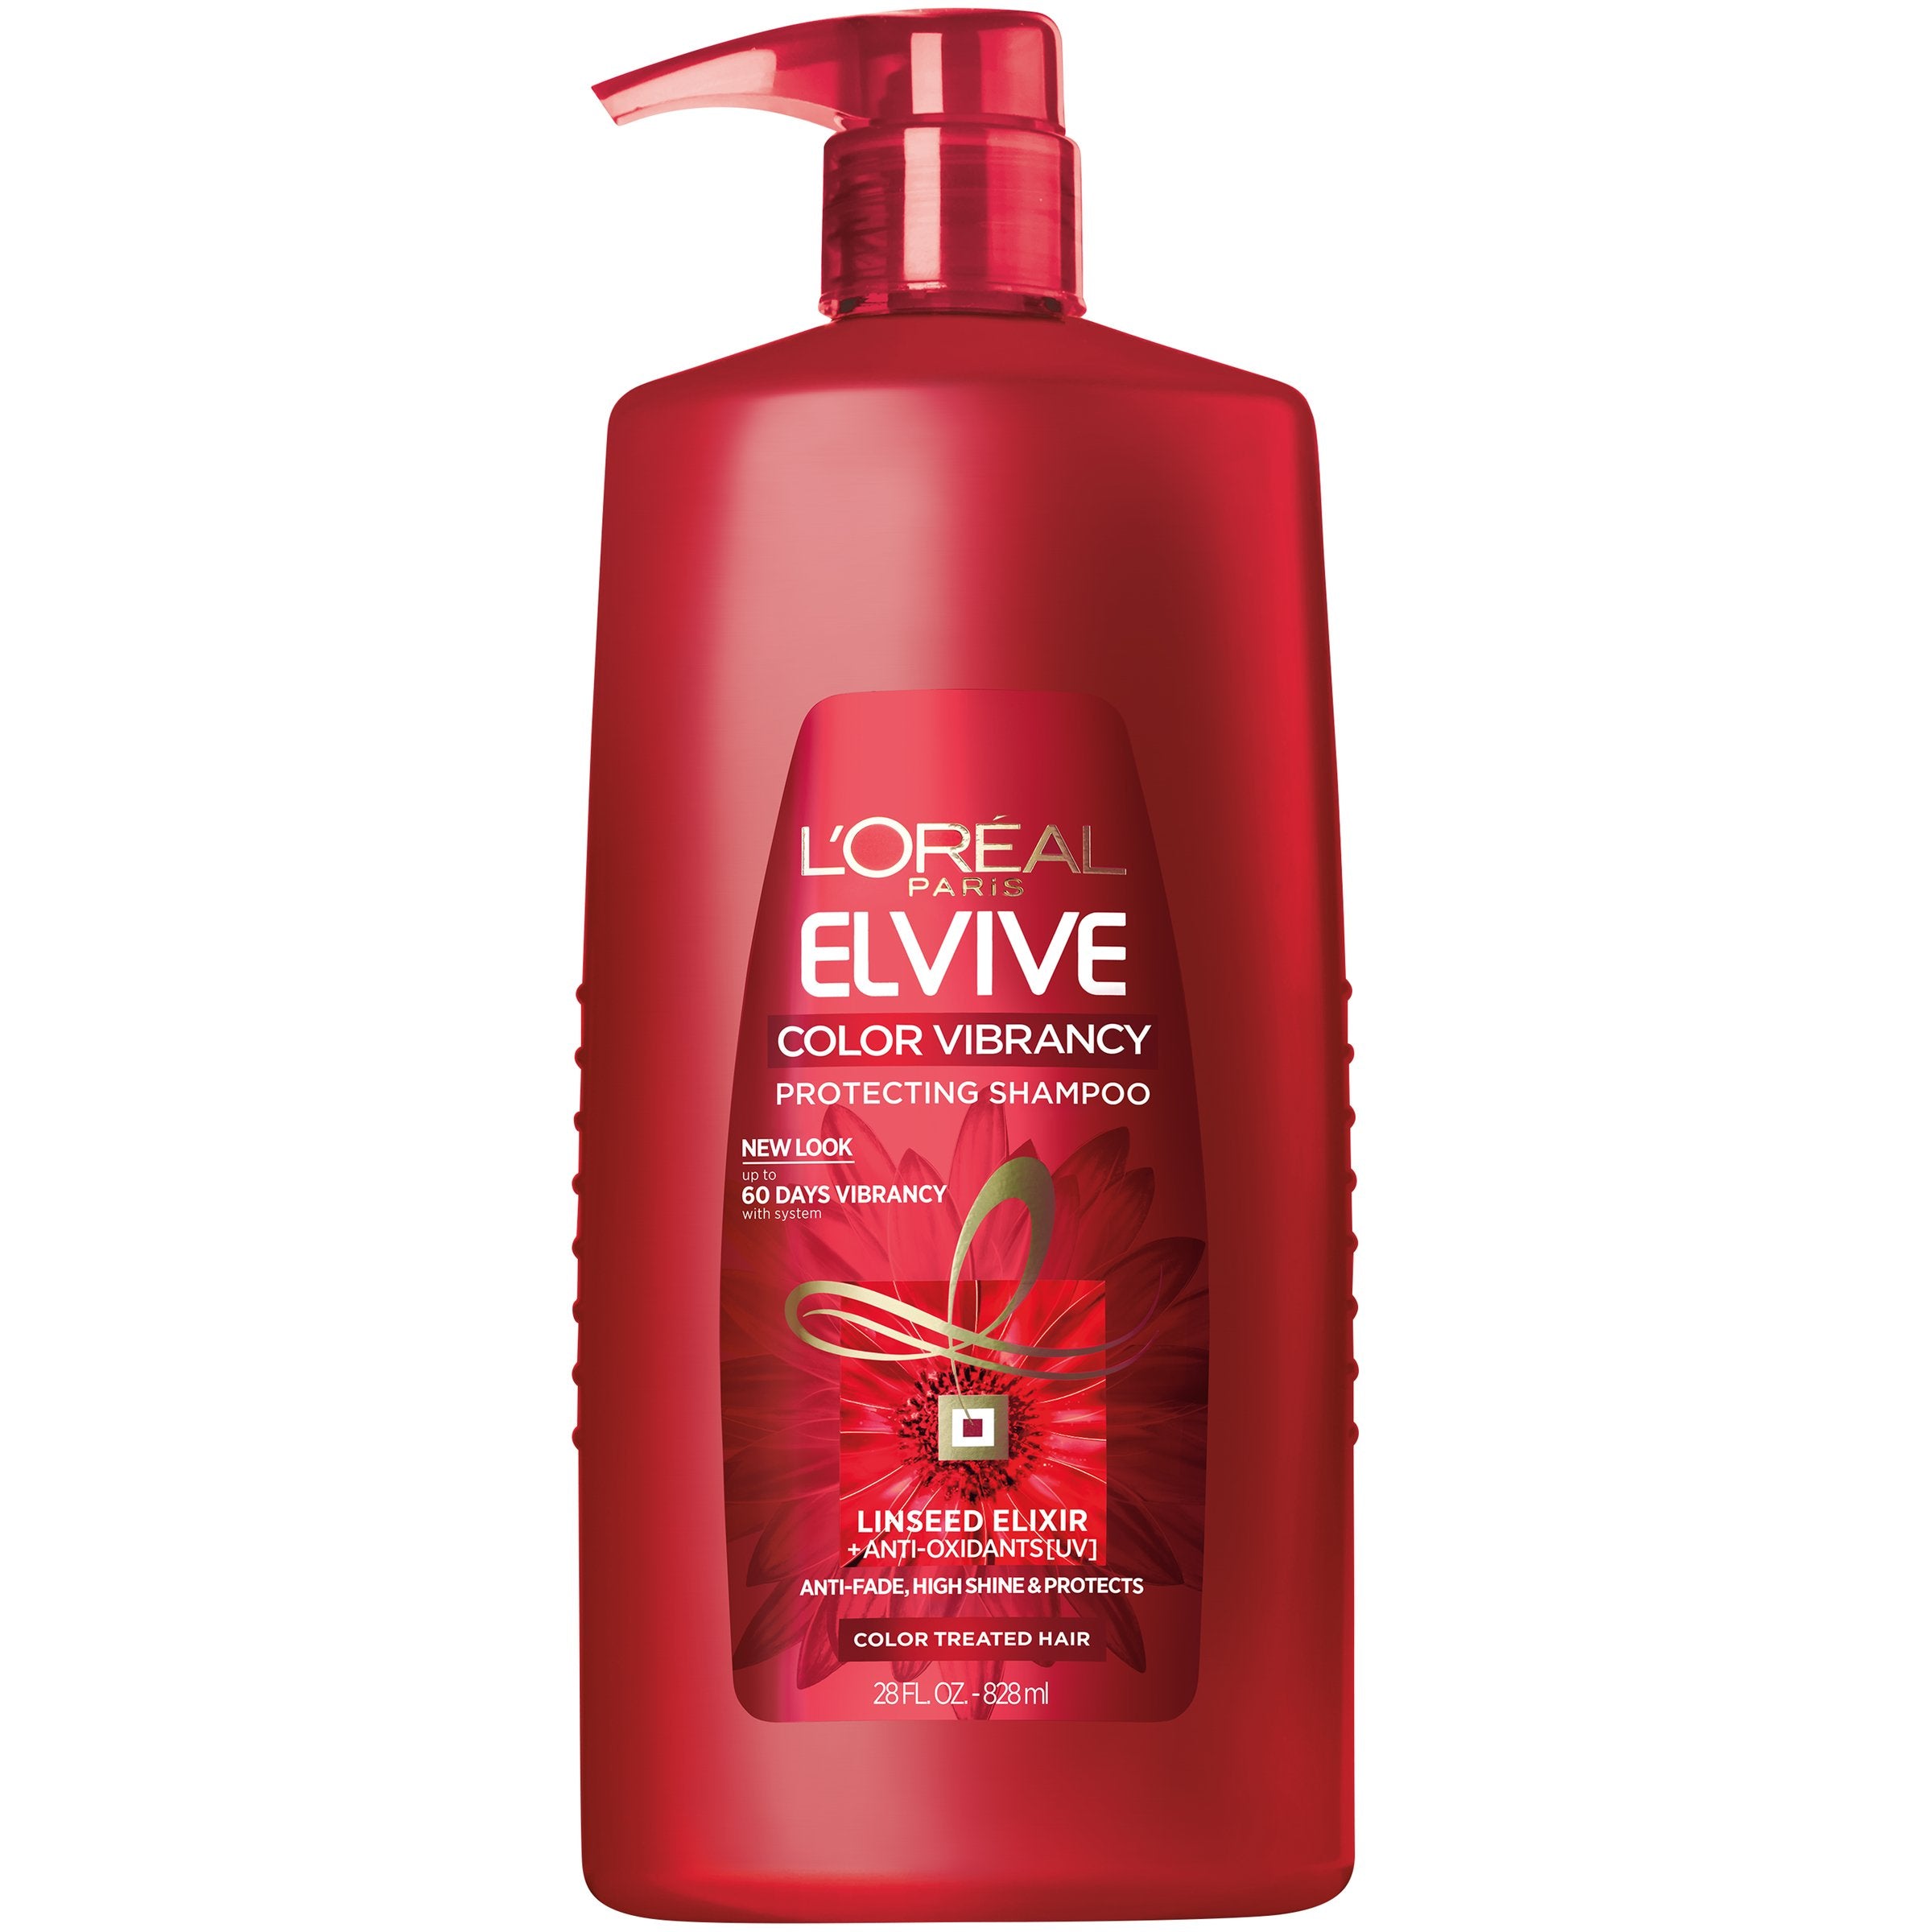 L'Oreal Paris Elvive Color Vibrancy Protecting Shampoo, for Color Treated Hair, Shampoo with Linseed Elixir and Anti-Oxidants, for Anti-Fade, High Shine, and Color Protection, 28 Fl Oz-CaribOnline